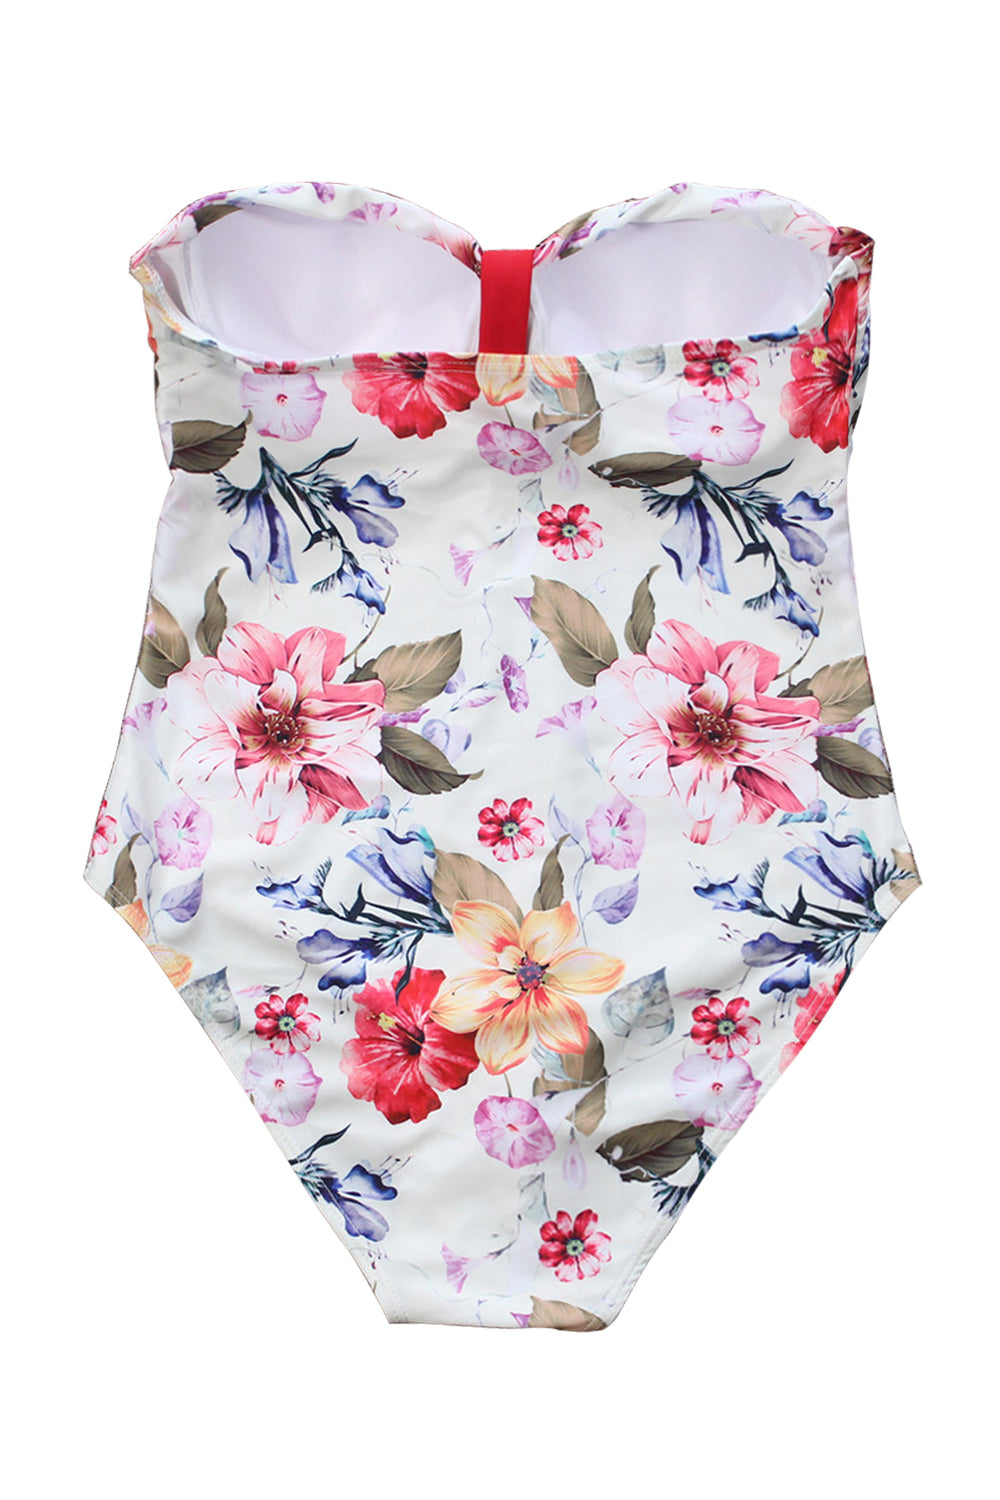 Iyasson White Floral Print Strappy One-piece Swimsuit